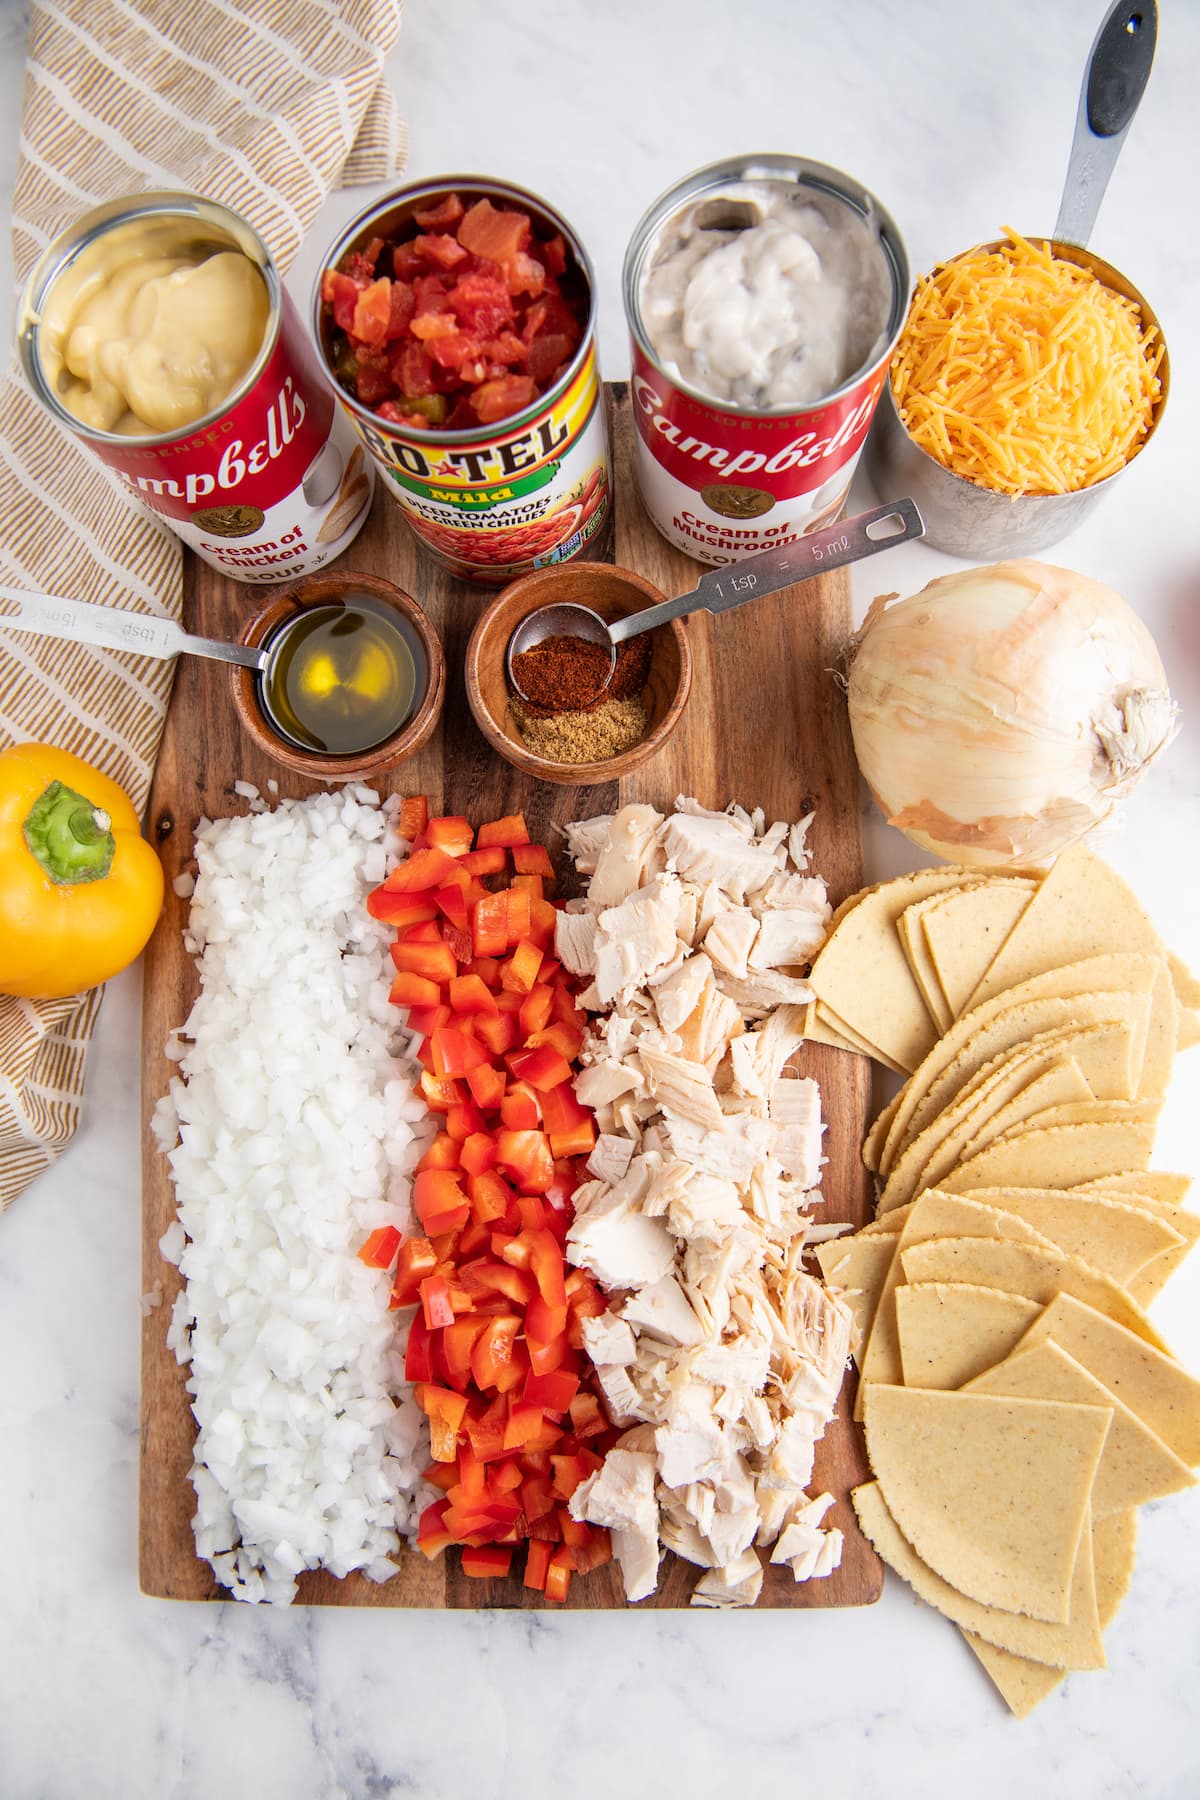 Ingredients to make a Mexican-inspired chicken casserole including tortillas, chicken, peppers, onions, canned chicken soup, tomatoes, seasonings, olive oil, and cheese